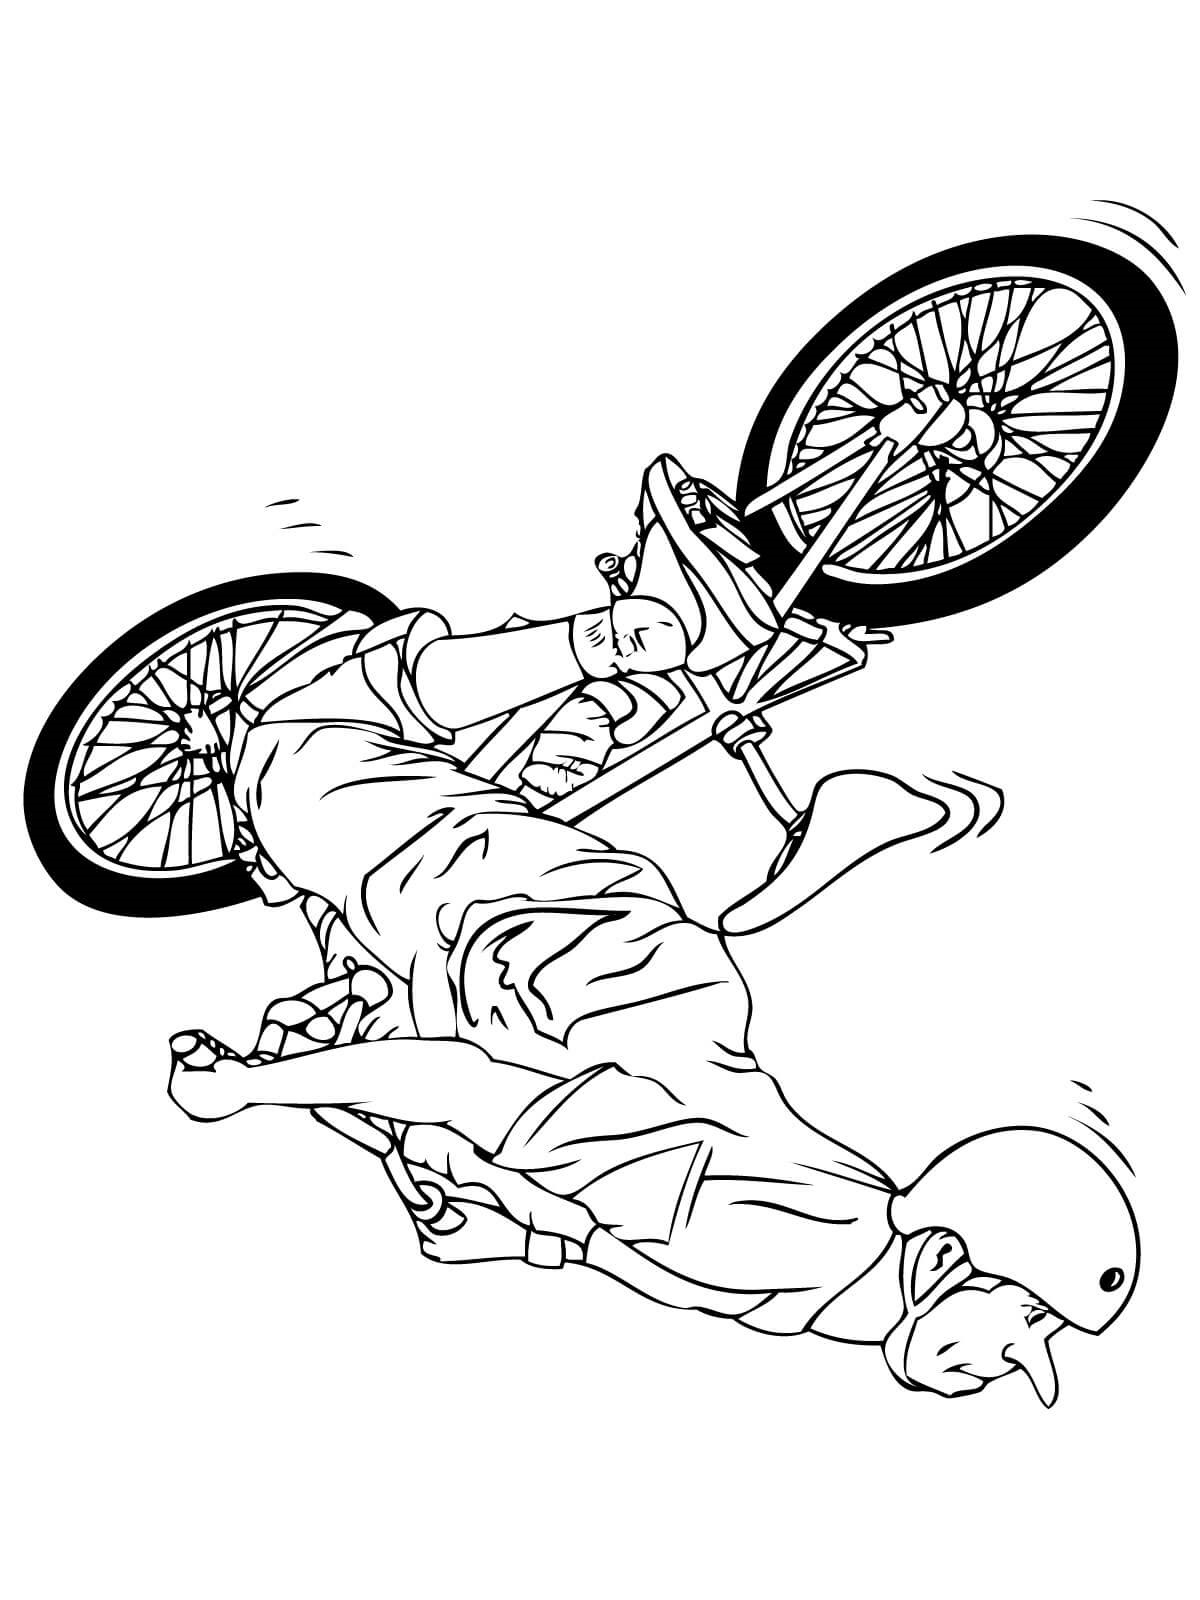 A Cyclist Falls Coloring Page - Free Printable Coloring Pages for Kids